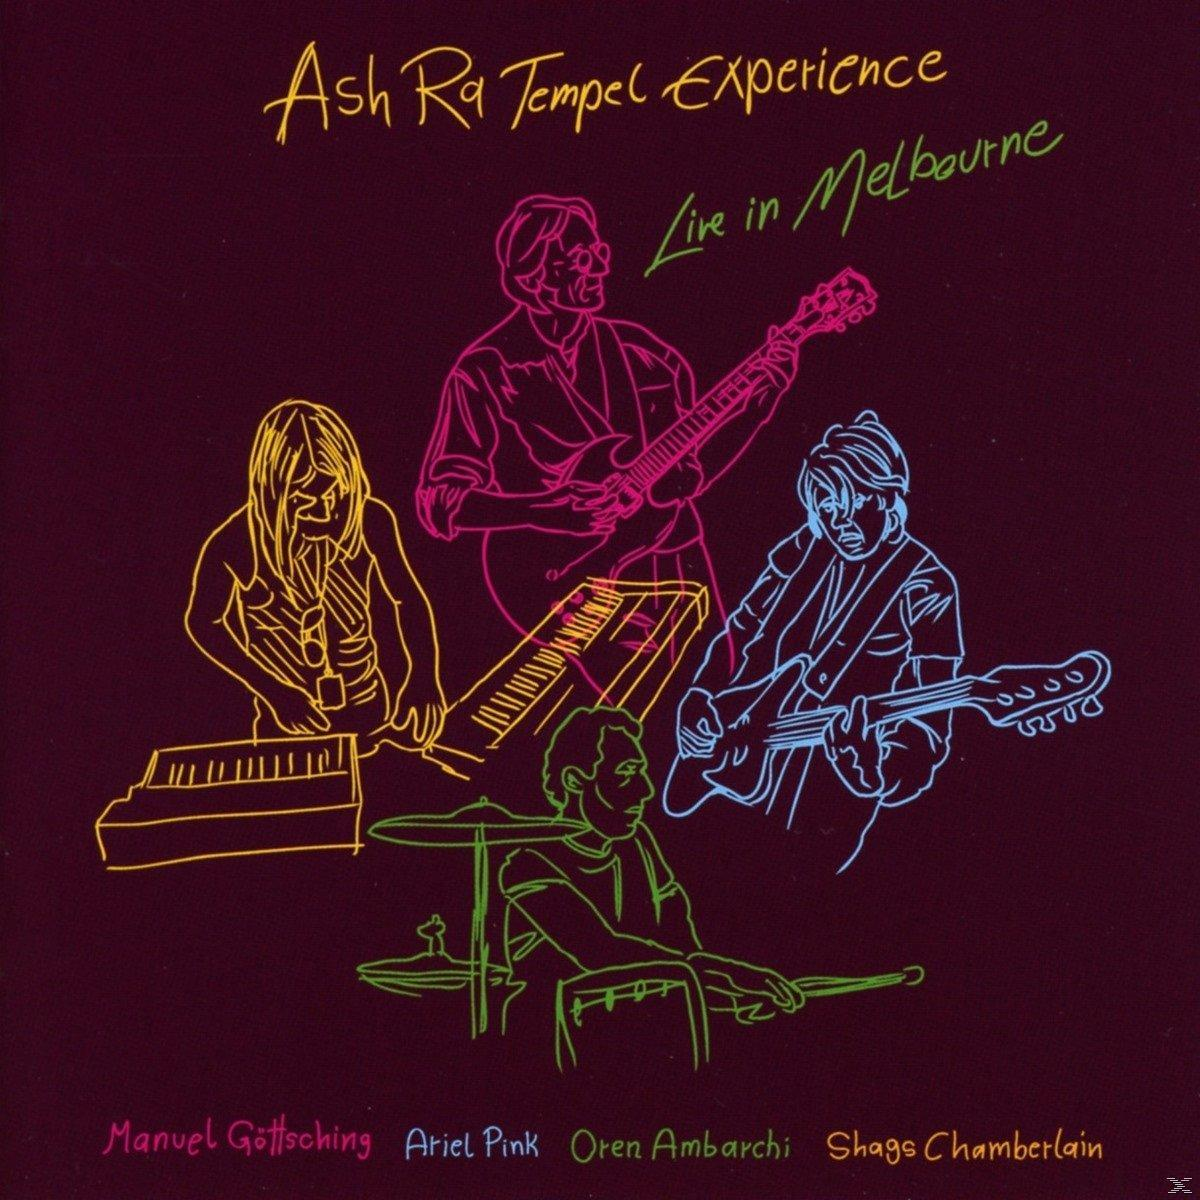 Ra Tempel Live - Melbourne Ash Experience - In (CD)